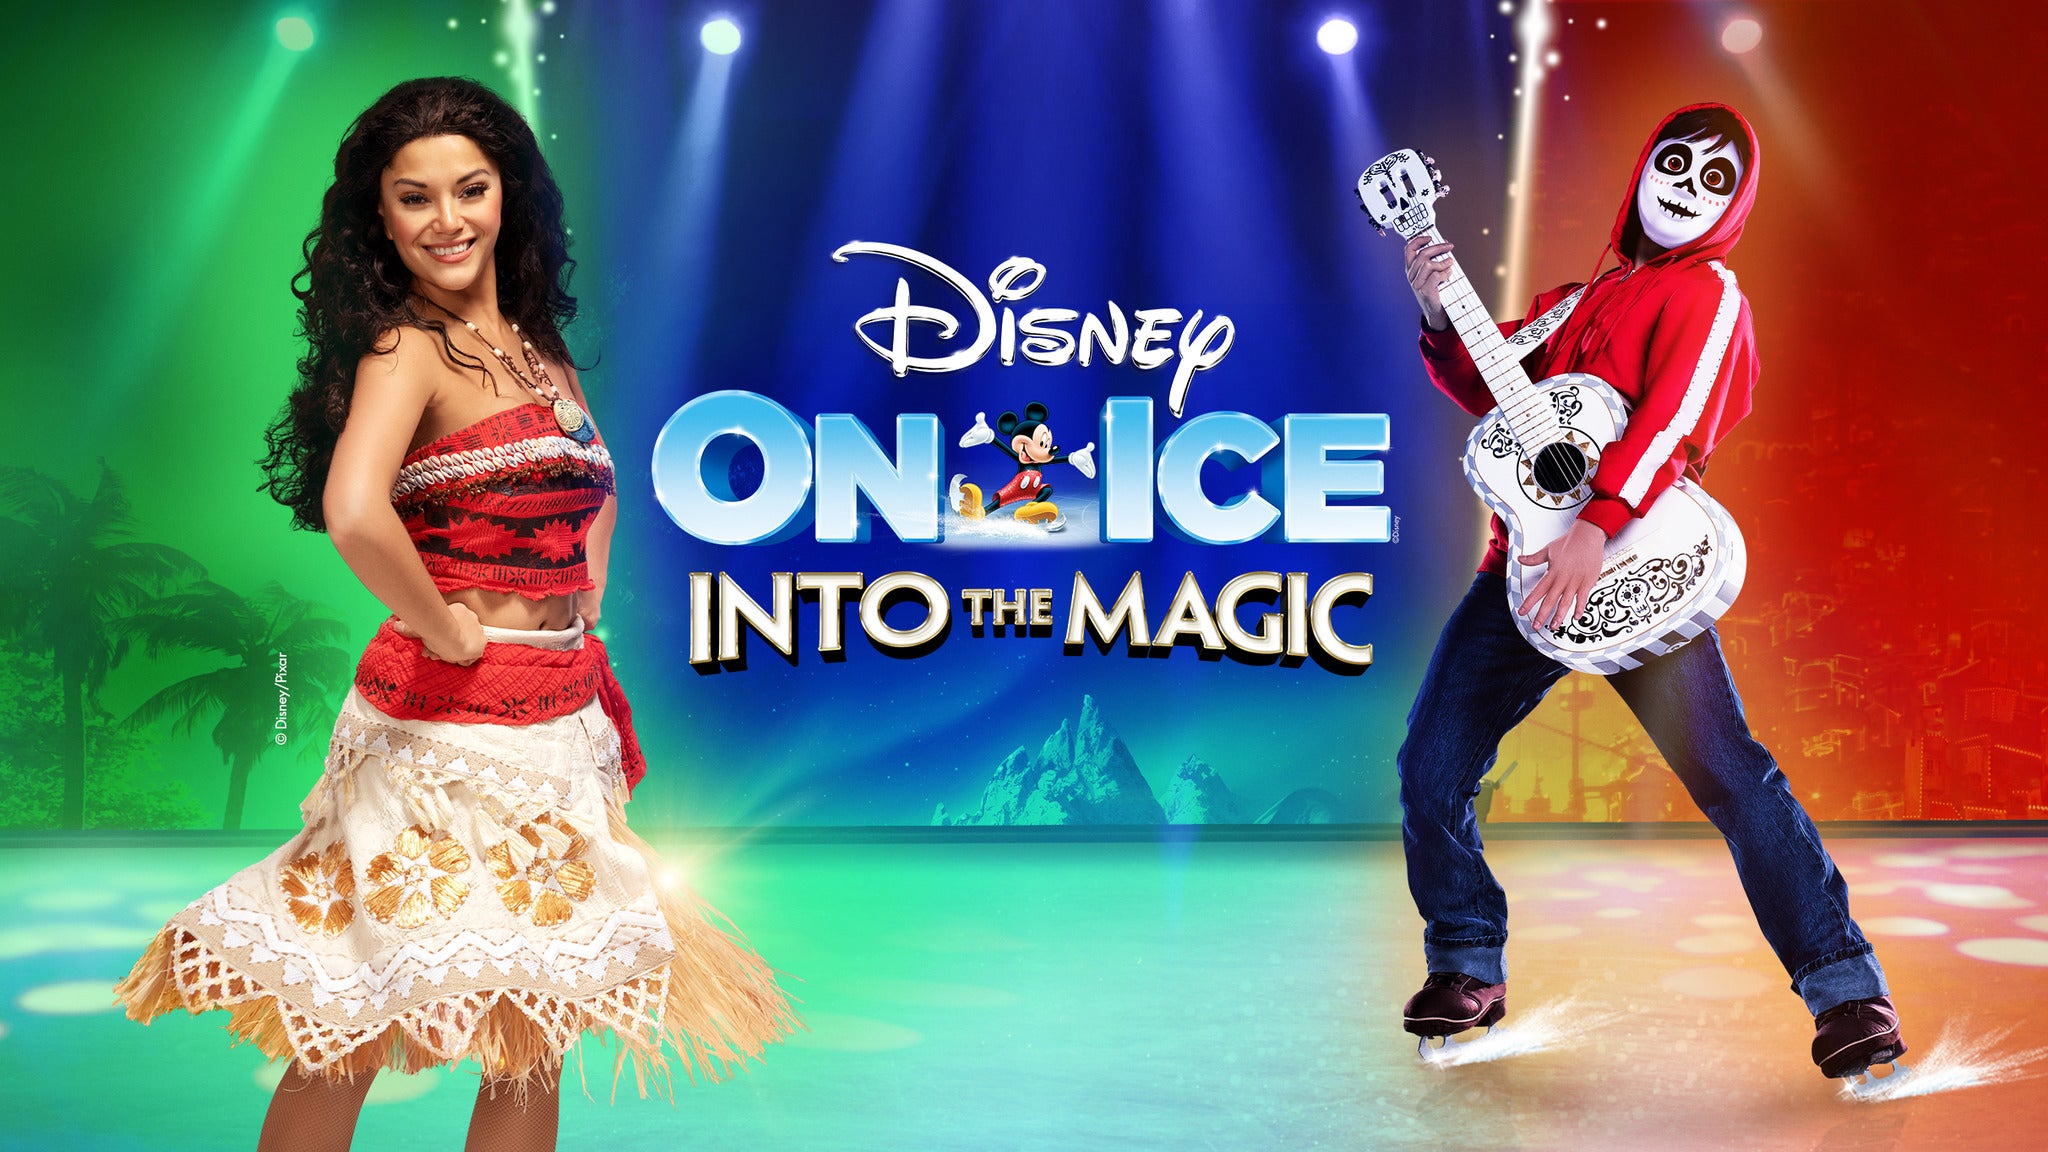 Disney On Ice presents Into the Magic in Rio Rancho event information